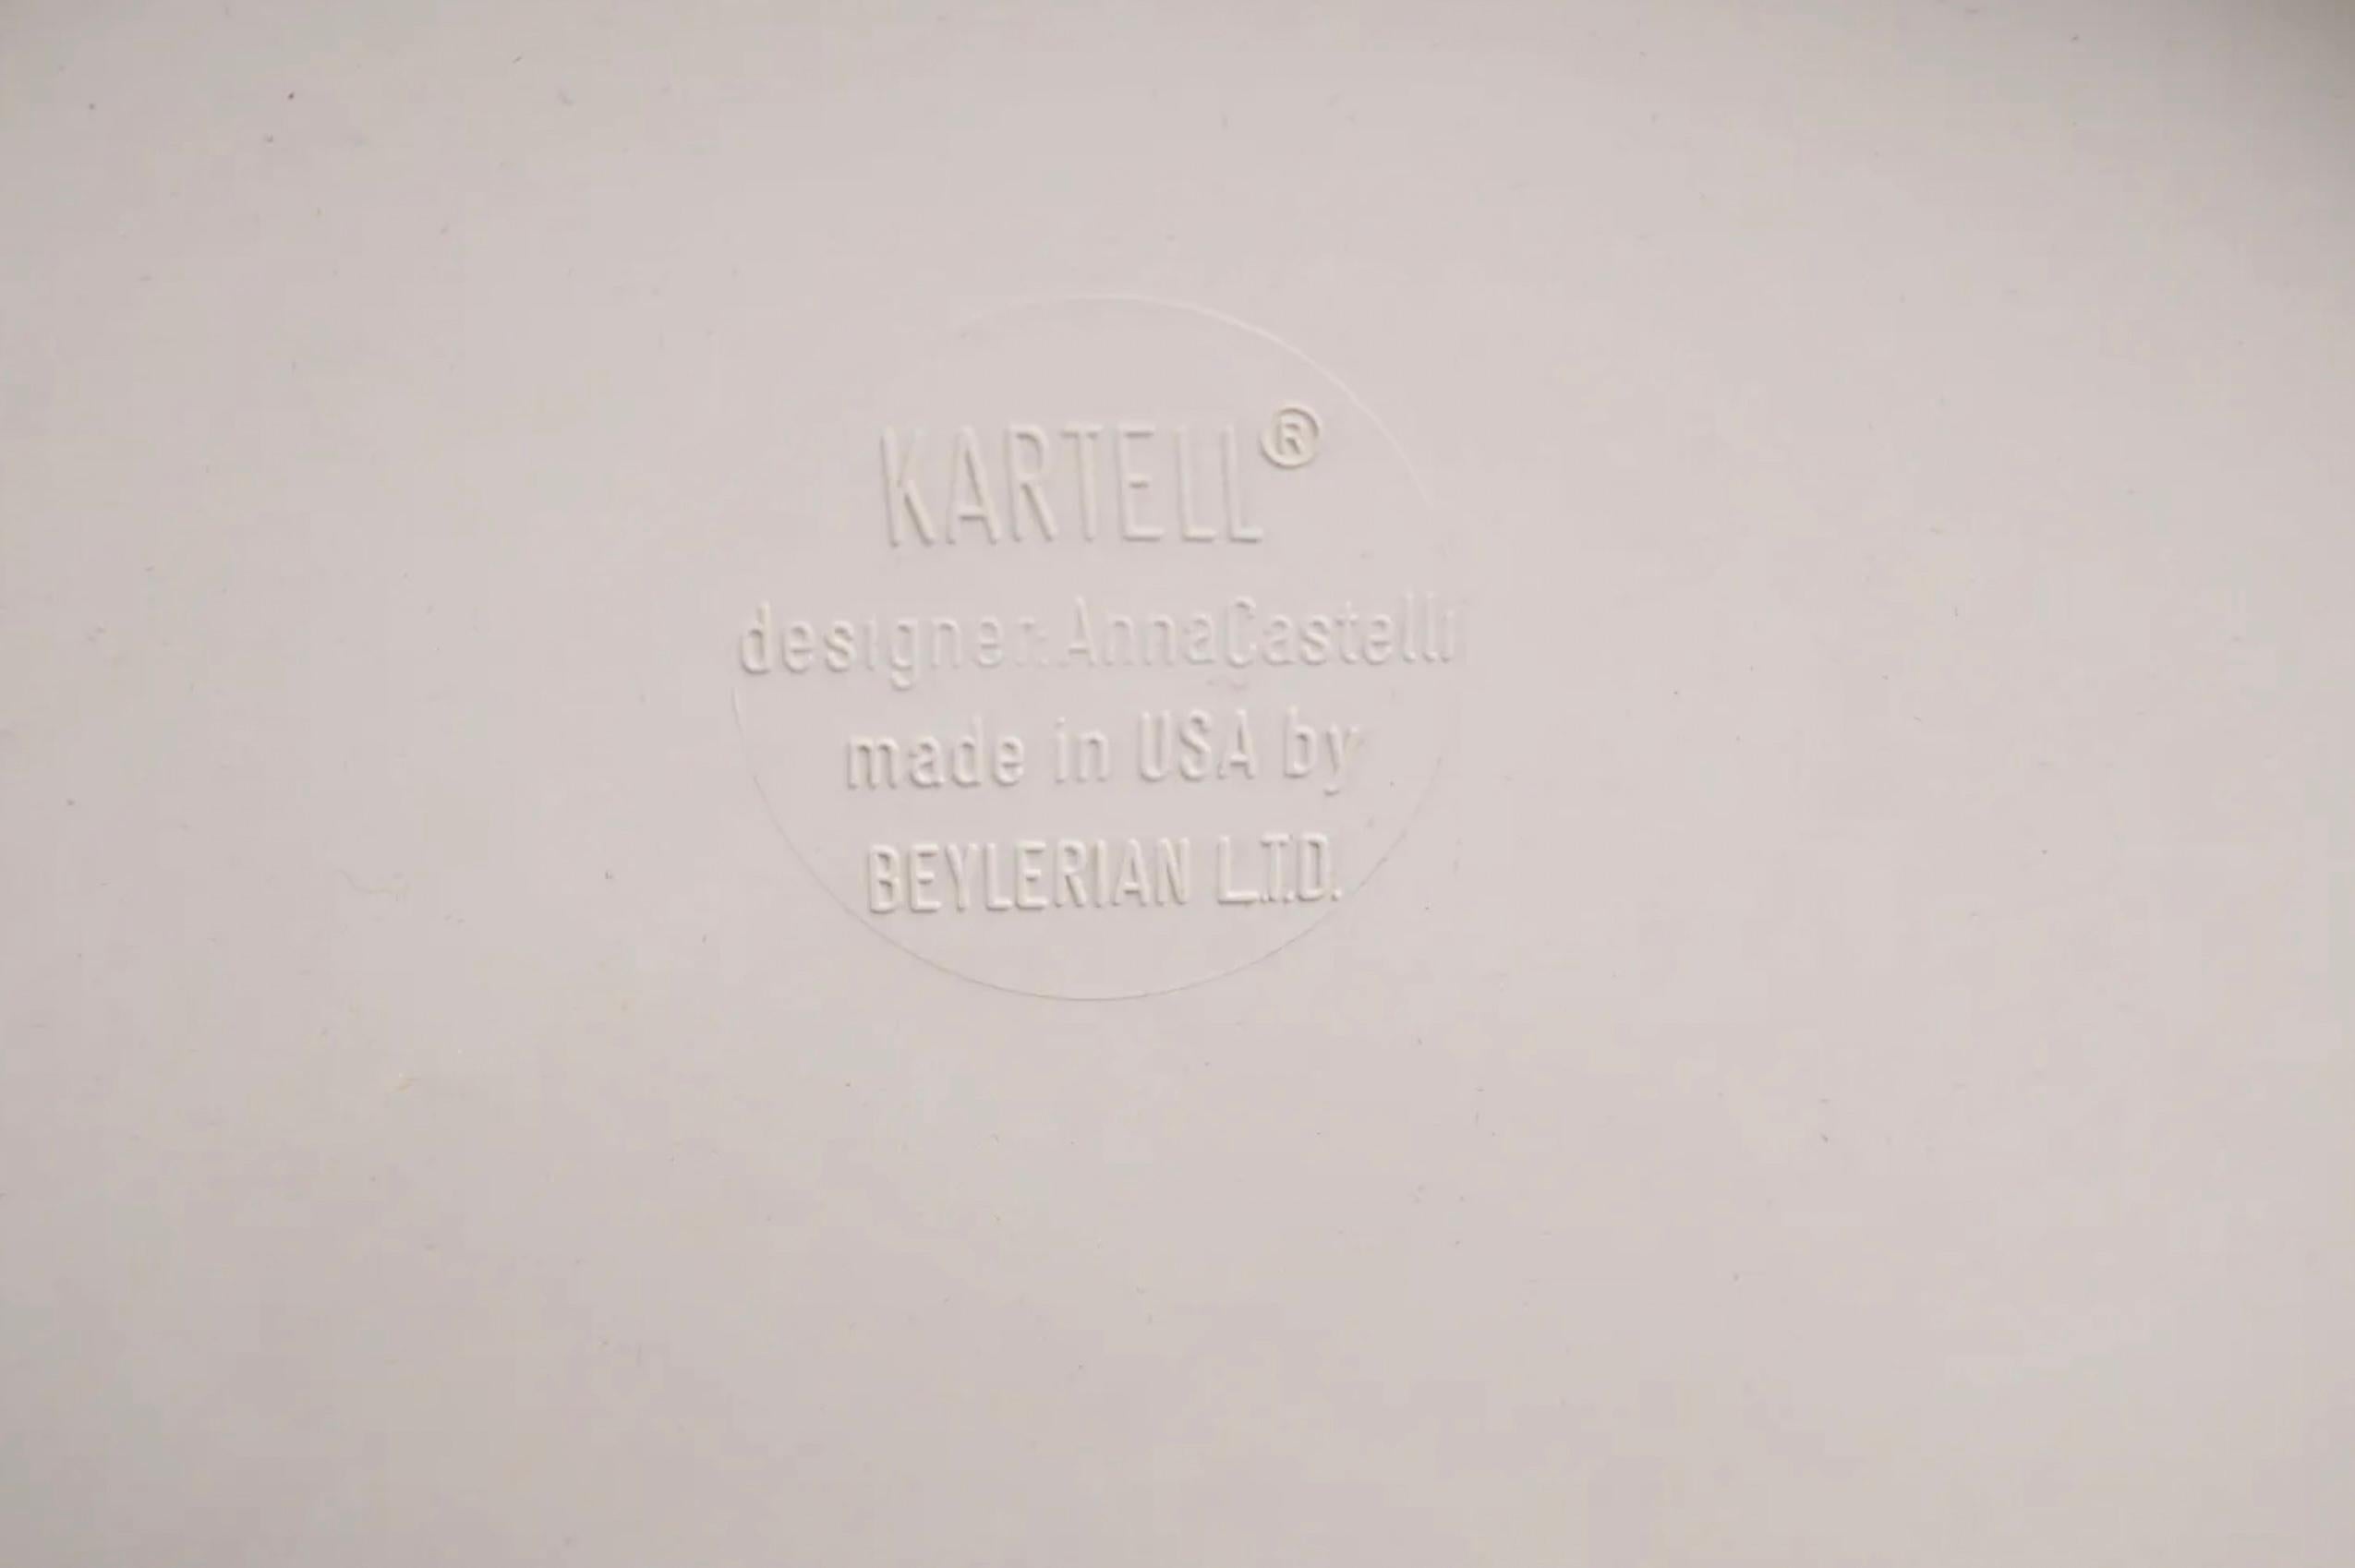 American Pair Anna Castelli Ferrieri for Kartell Componibili Containers in white 1970s For Sale